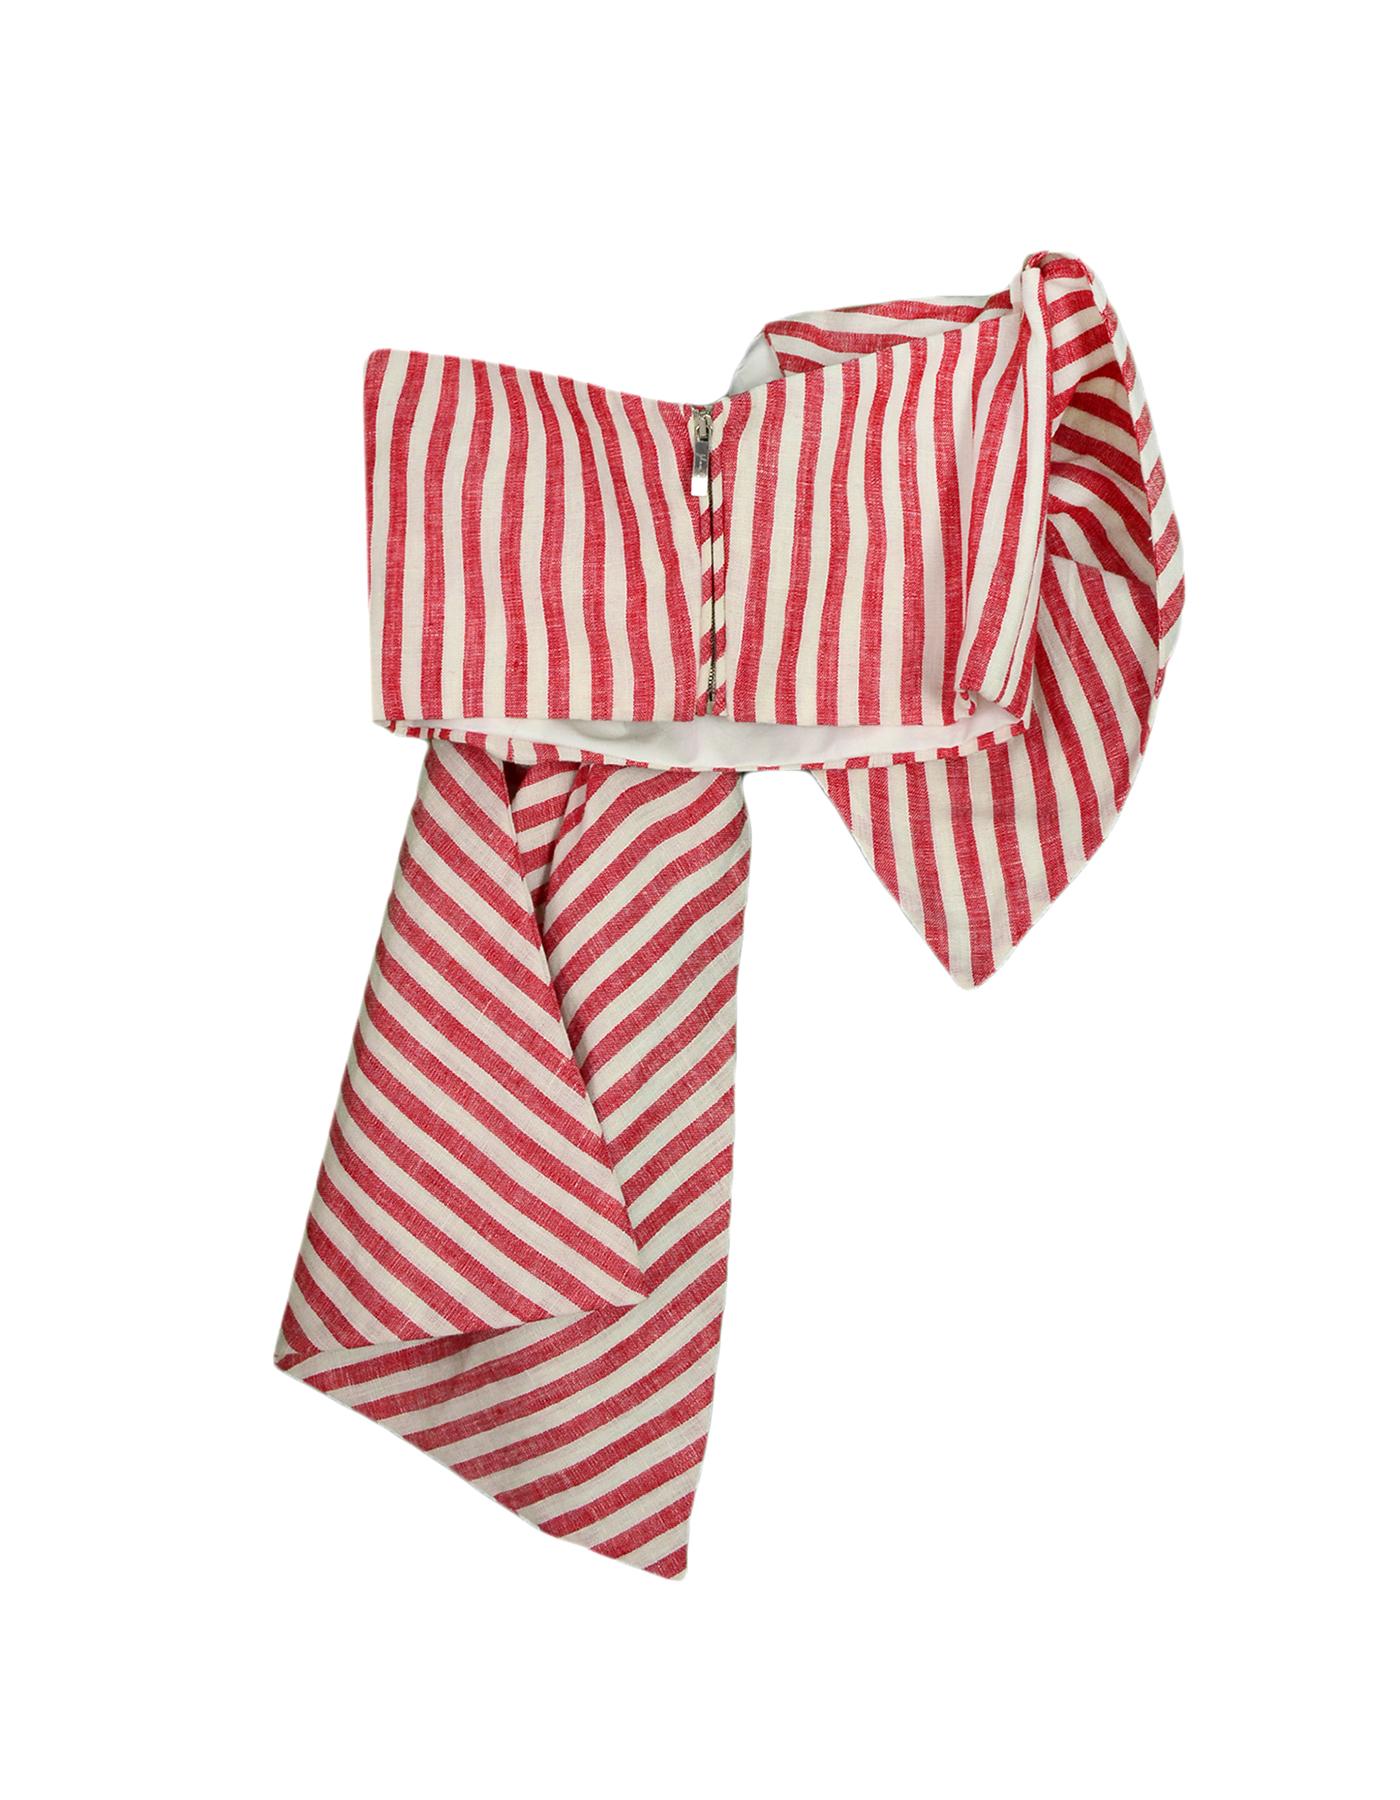 Johanna Ortiz Red/White Linen Bustier Top w/ Bow sz 0

Made In: Colombia
Color: Red, White
Materials: 100% Linen 
Lining: 97% Cotton, 3% Elastane
Opening/Closure: Back zip
Overall Condition: Excellent pre-owned condition
Estimated Retail: $495 +